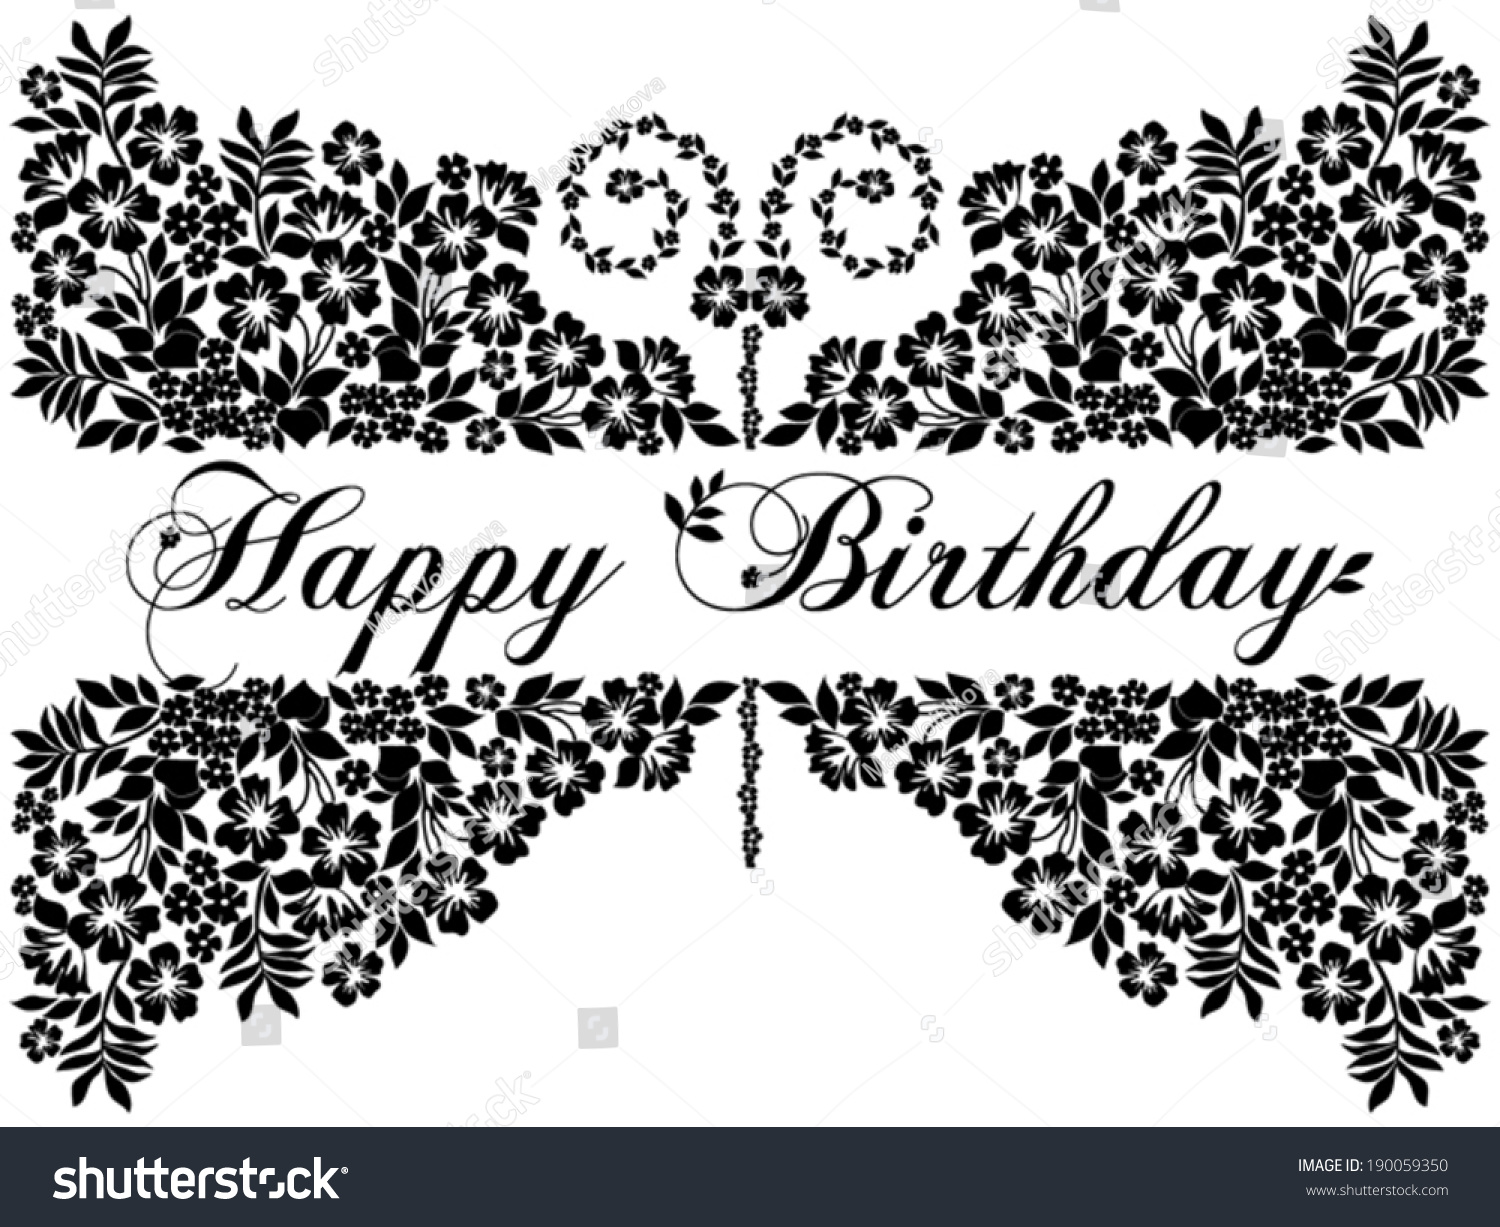 Happy Birthday Card Funny Butterfly Place Stock Vector 190059350 ...